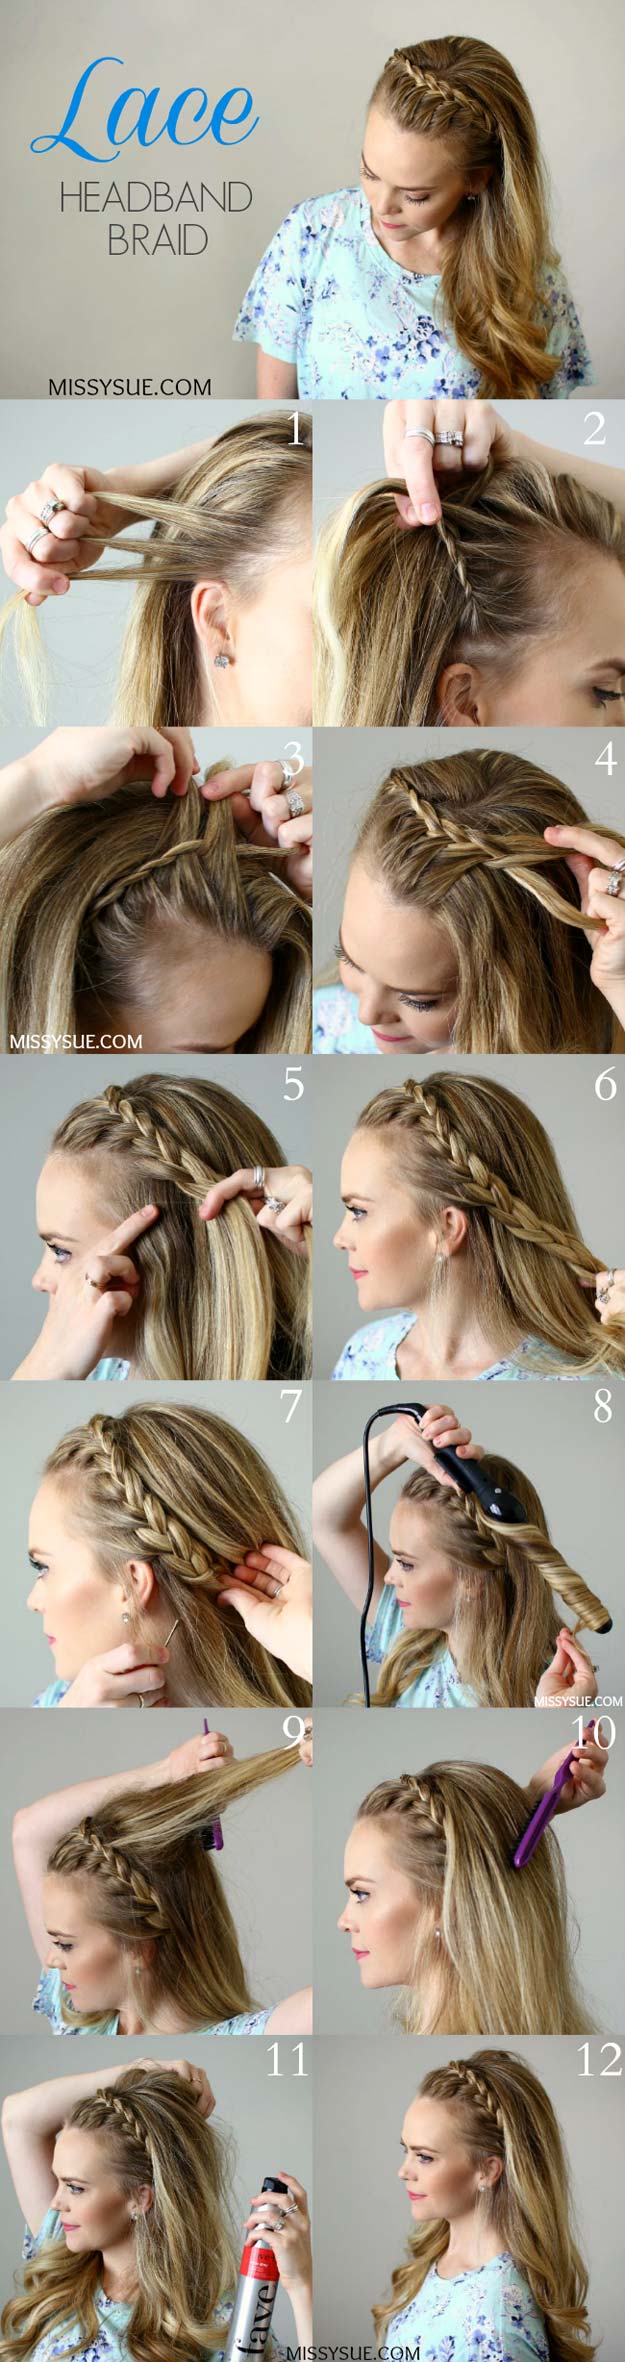 Best Hair Braiding Tutorials - Lace Headband Braid - Easy Step by Step Tutorials for Braids - How To Braid Fishtail, French Braids, Flower Crown, Side Braids, Cornrows, Updos - Cool Braided Hairstyles for Girls, Teens and Women - School, Day and Evening, Boho, Casual and Formal Looks #hairstyles #braiding #braidingtutorials #diyhair 